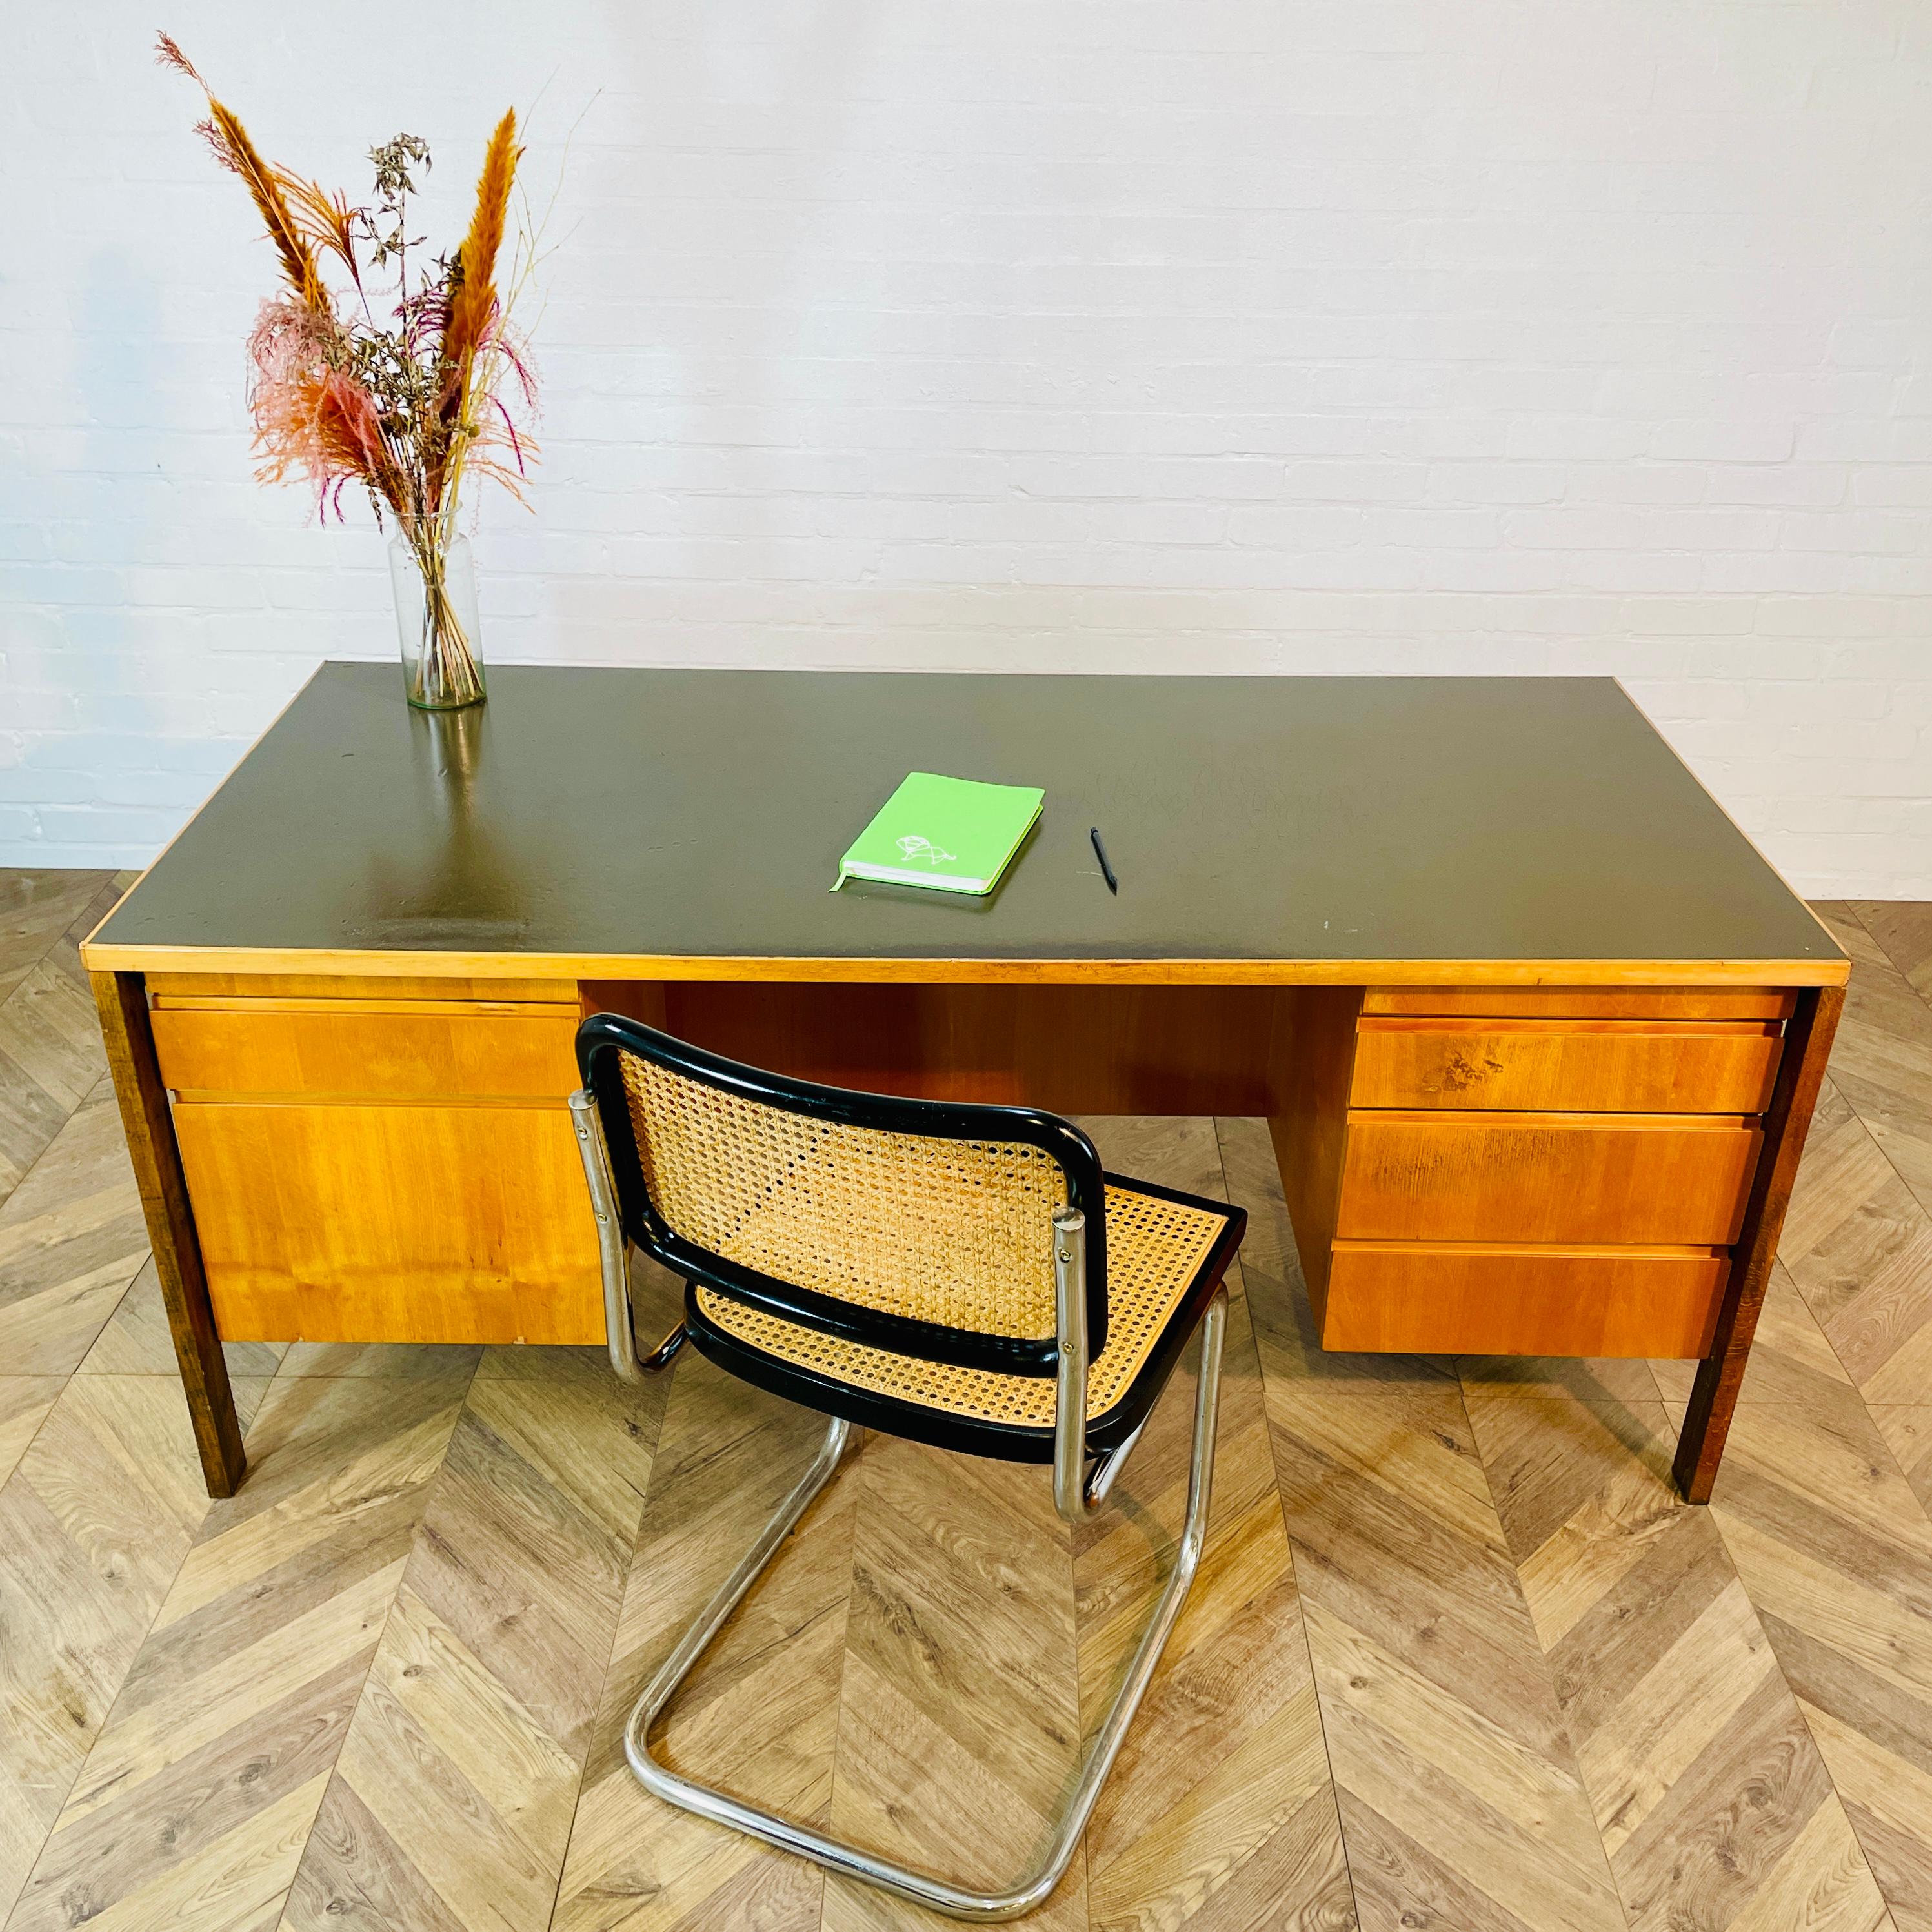 American Mid-Century Large Desk By Jens Risom with Green Rixine Top, circa 1960s For Sale